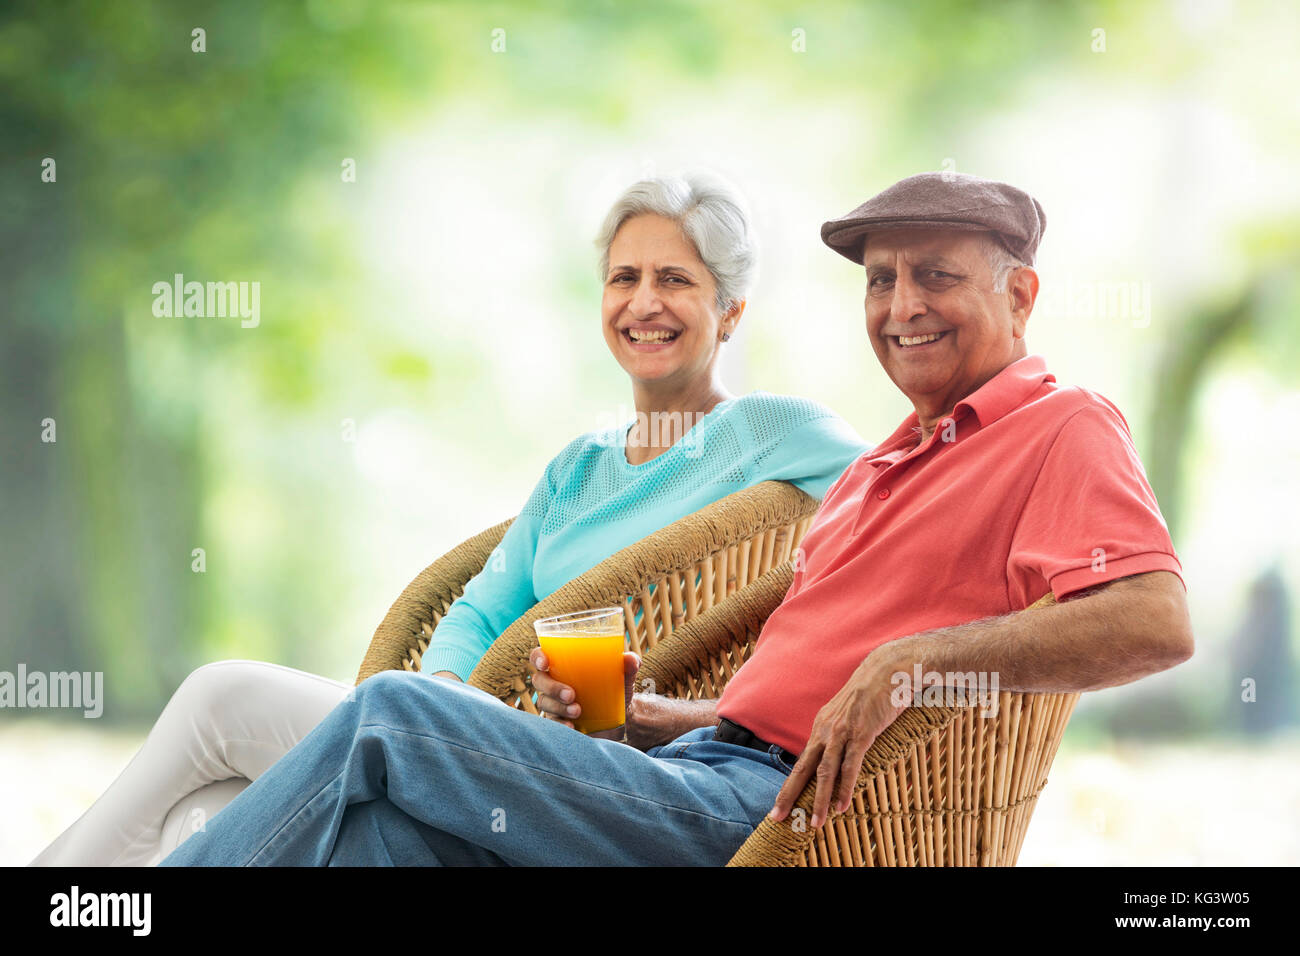 Senior couple sitting outdoors on Wicker Chair Banque D'Images